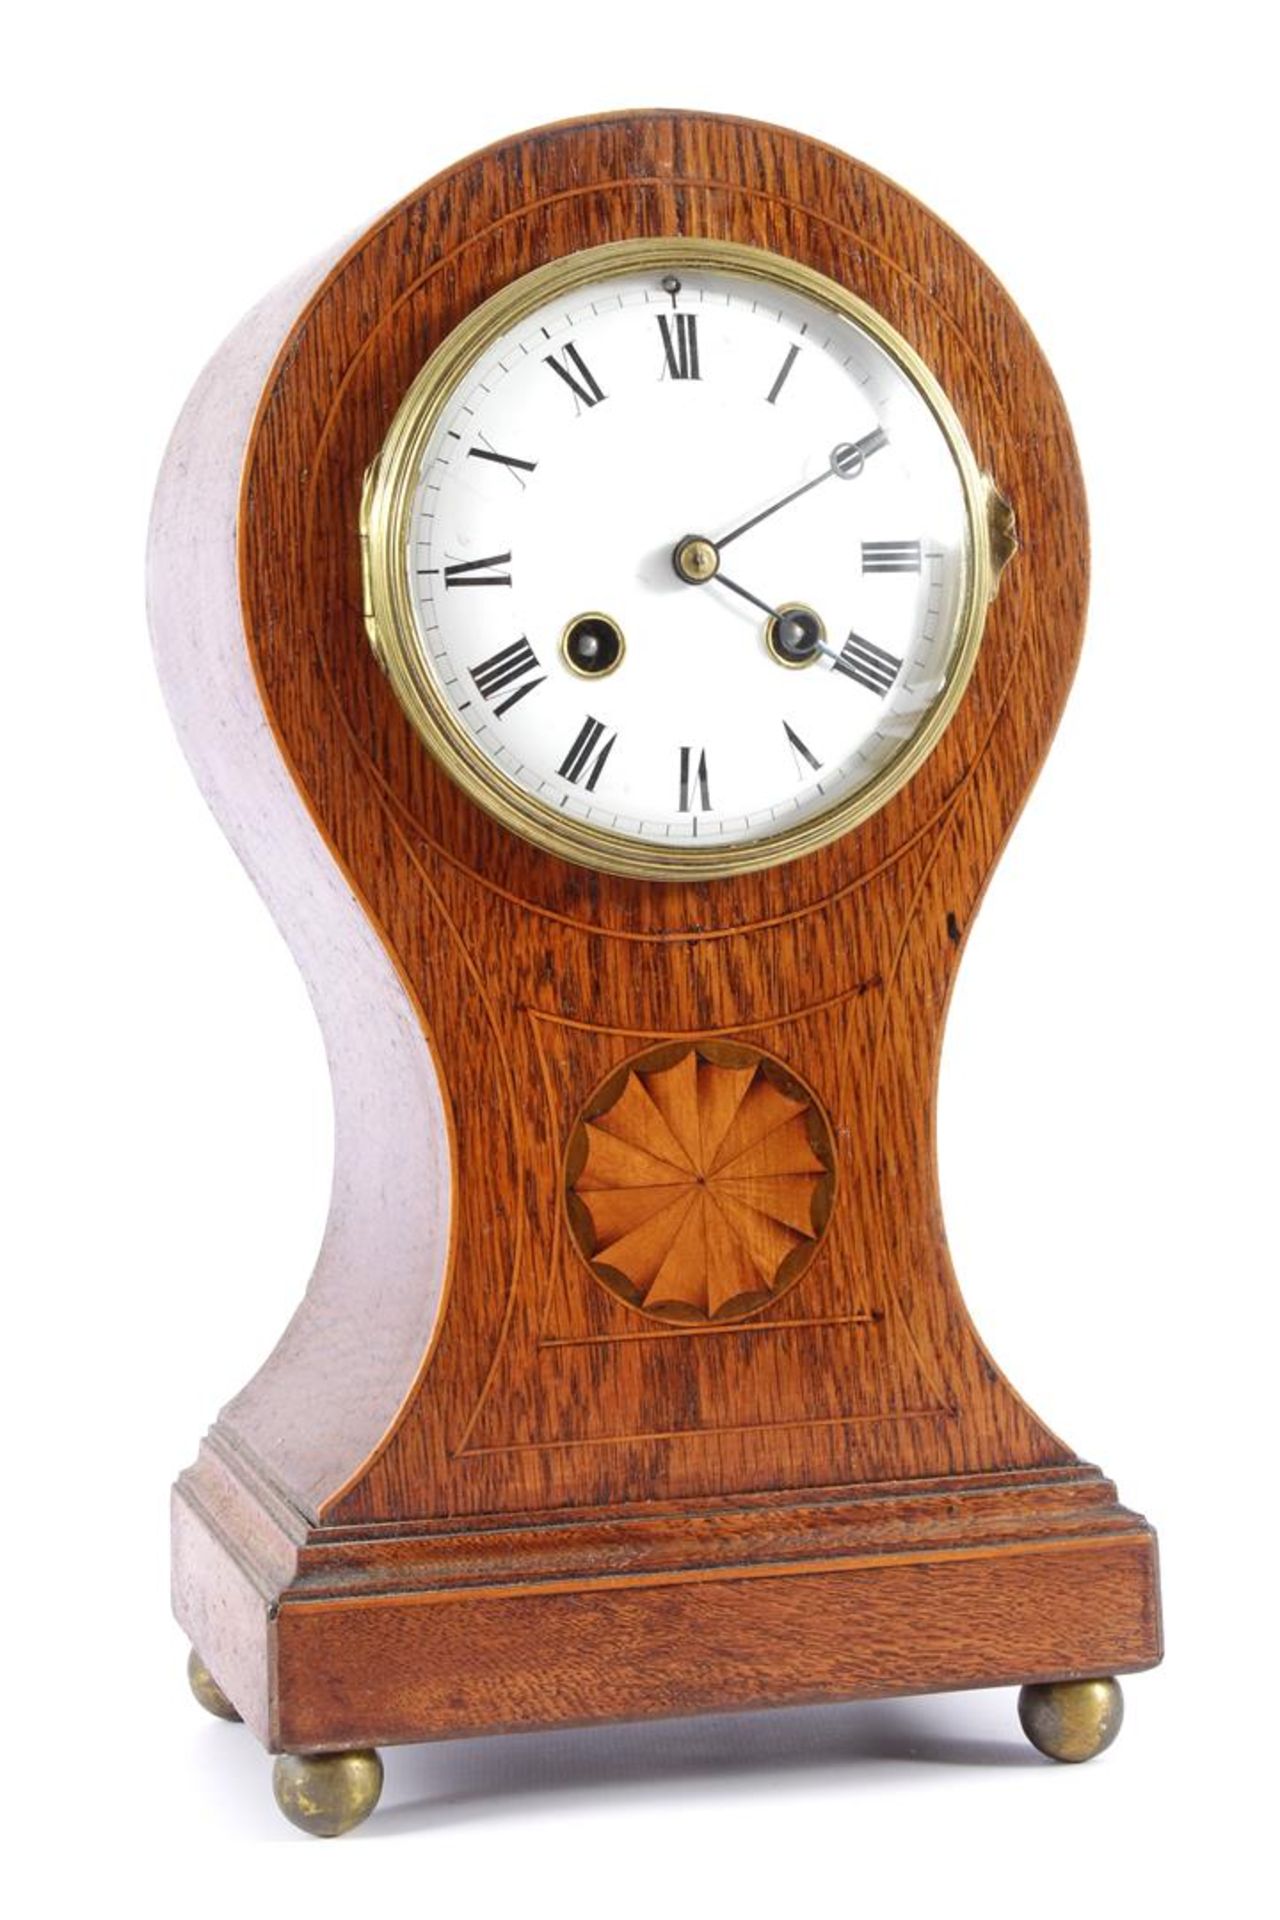 French balloon clock in oak case with intarsia pattern on the front, movement marked Japy Freres